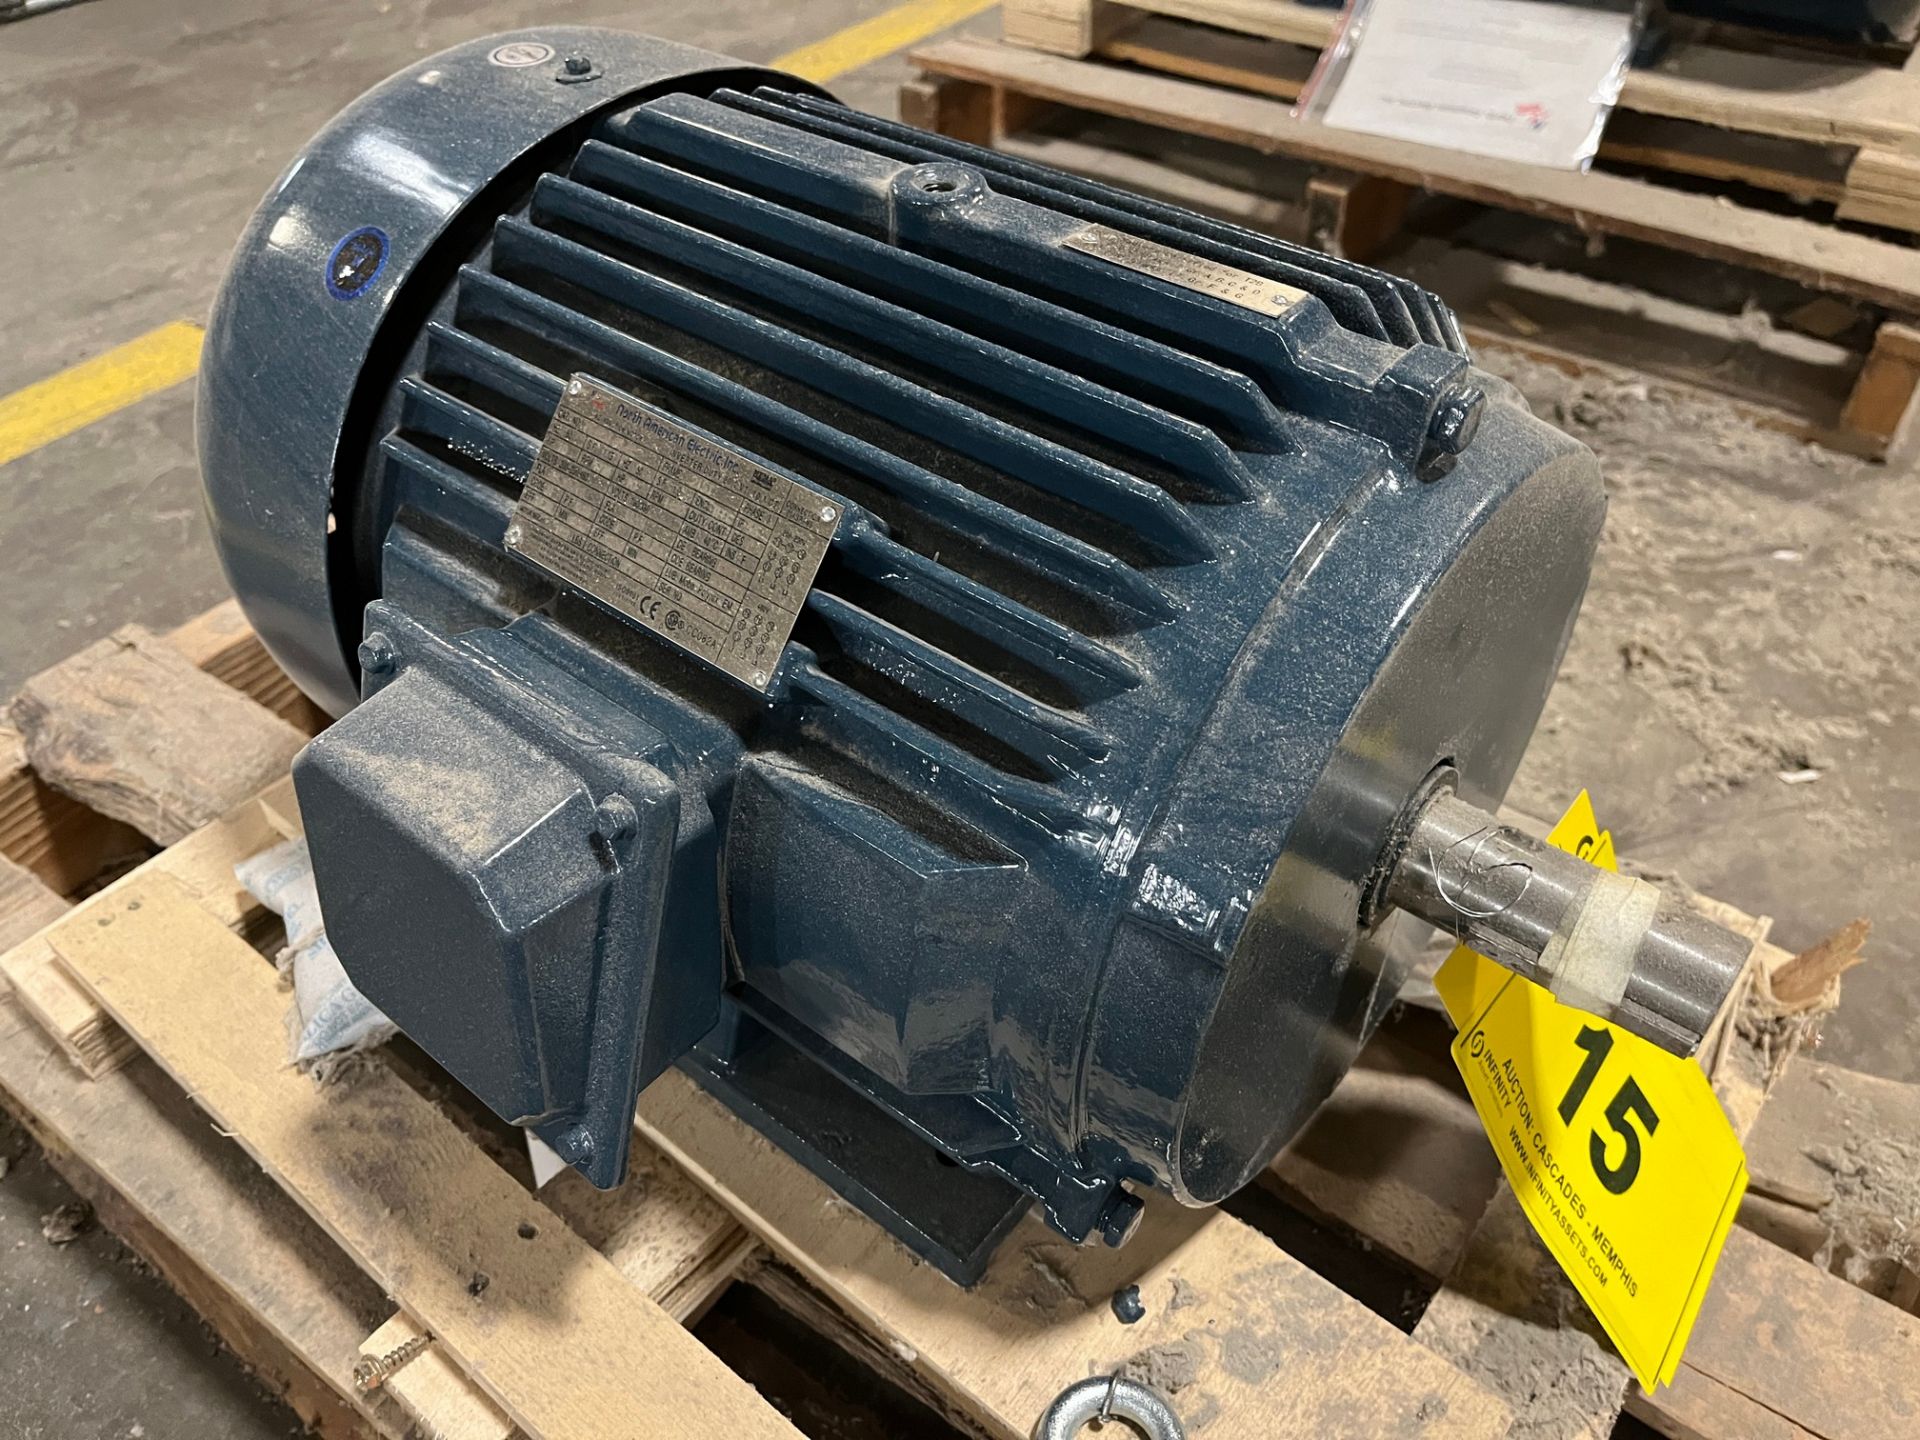 NORTH AMERICAN ELECTRIC AC INDUCTION MOTOR, 10HP MOTOR, 1,770 RPM, 208-230/460V, 215T FRAME (PAPER